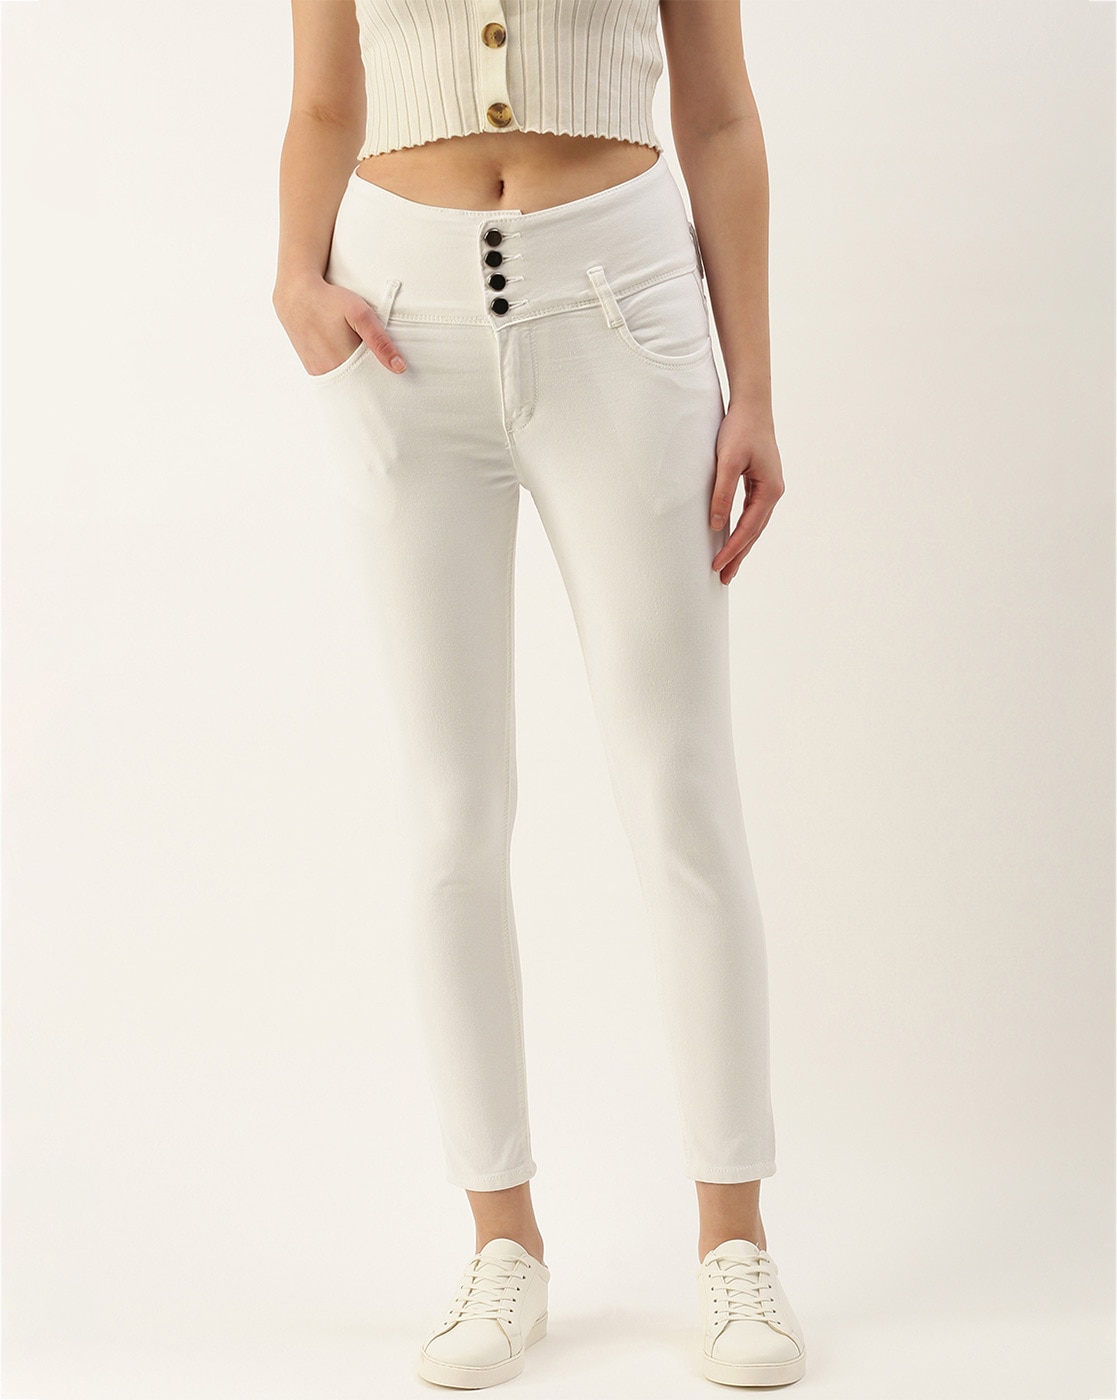 Shop Blue Giraffe Girls White Solid Regular Fit Jeans | ICONIC INDIA –  Iconic India